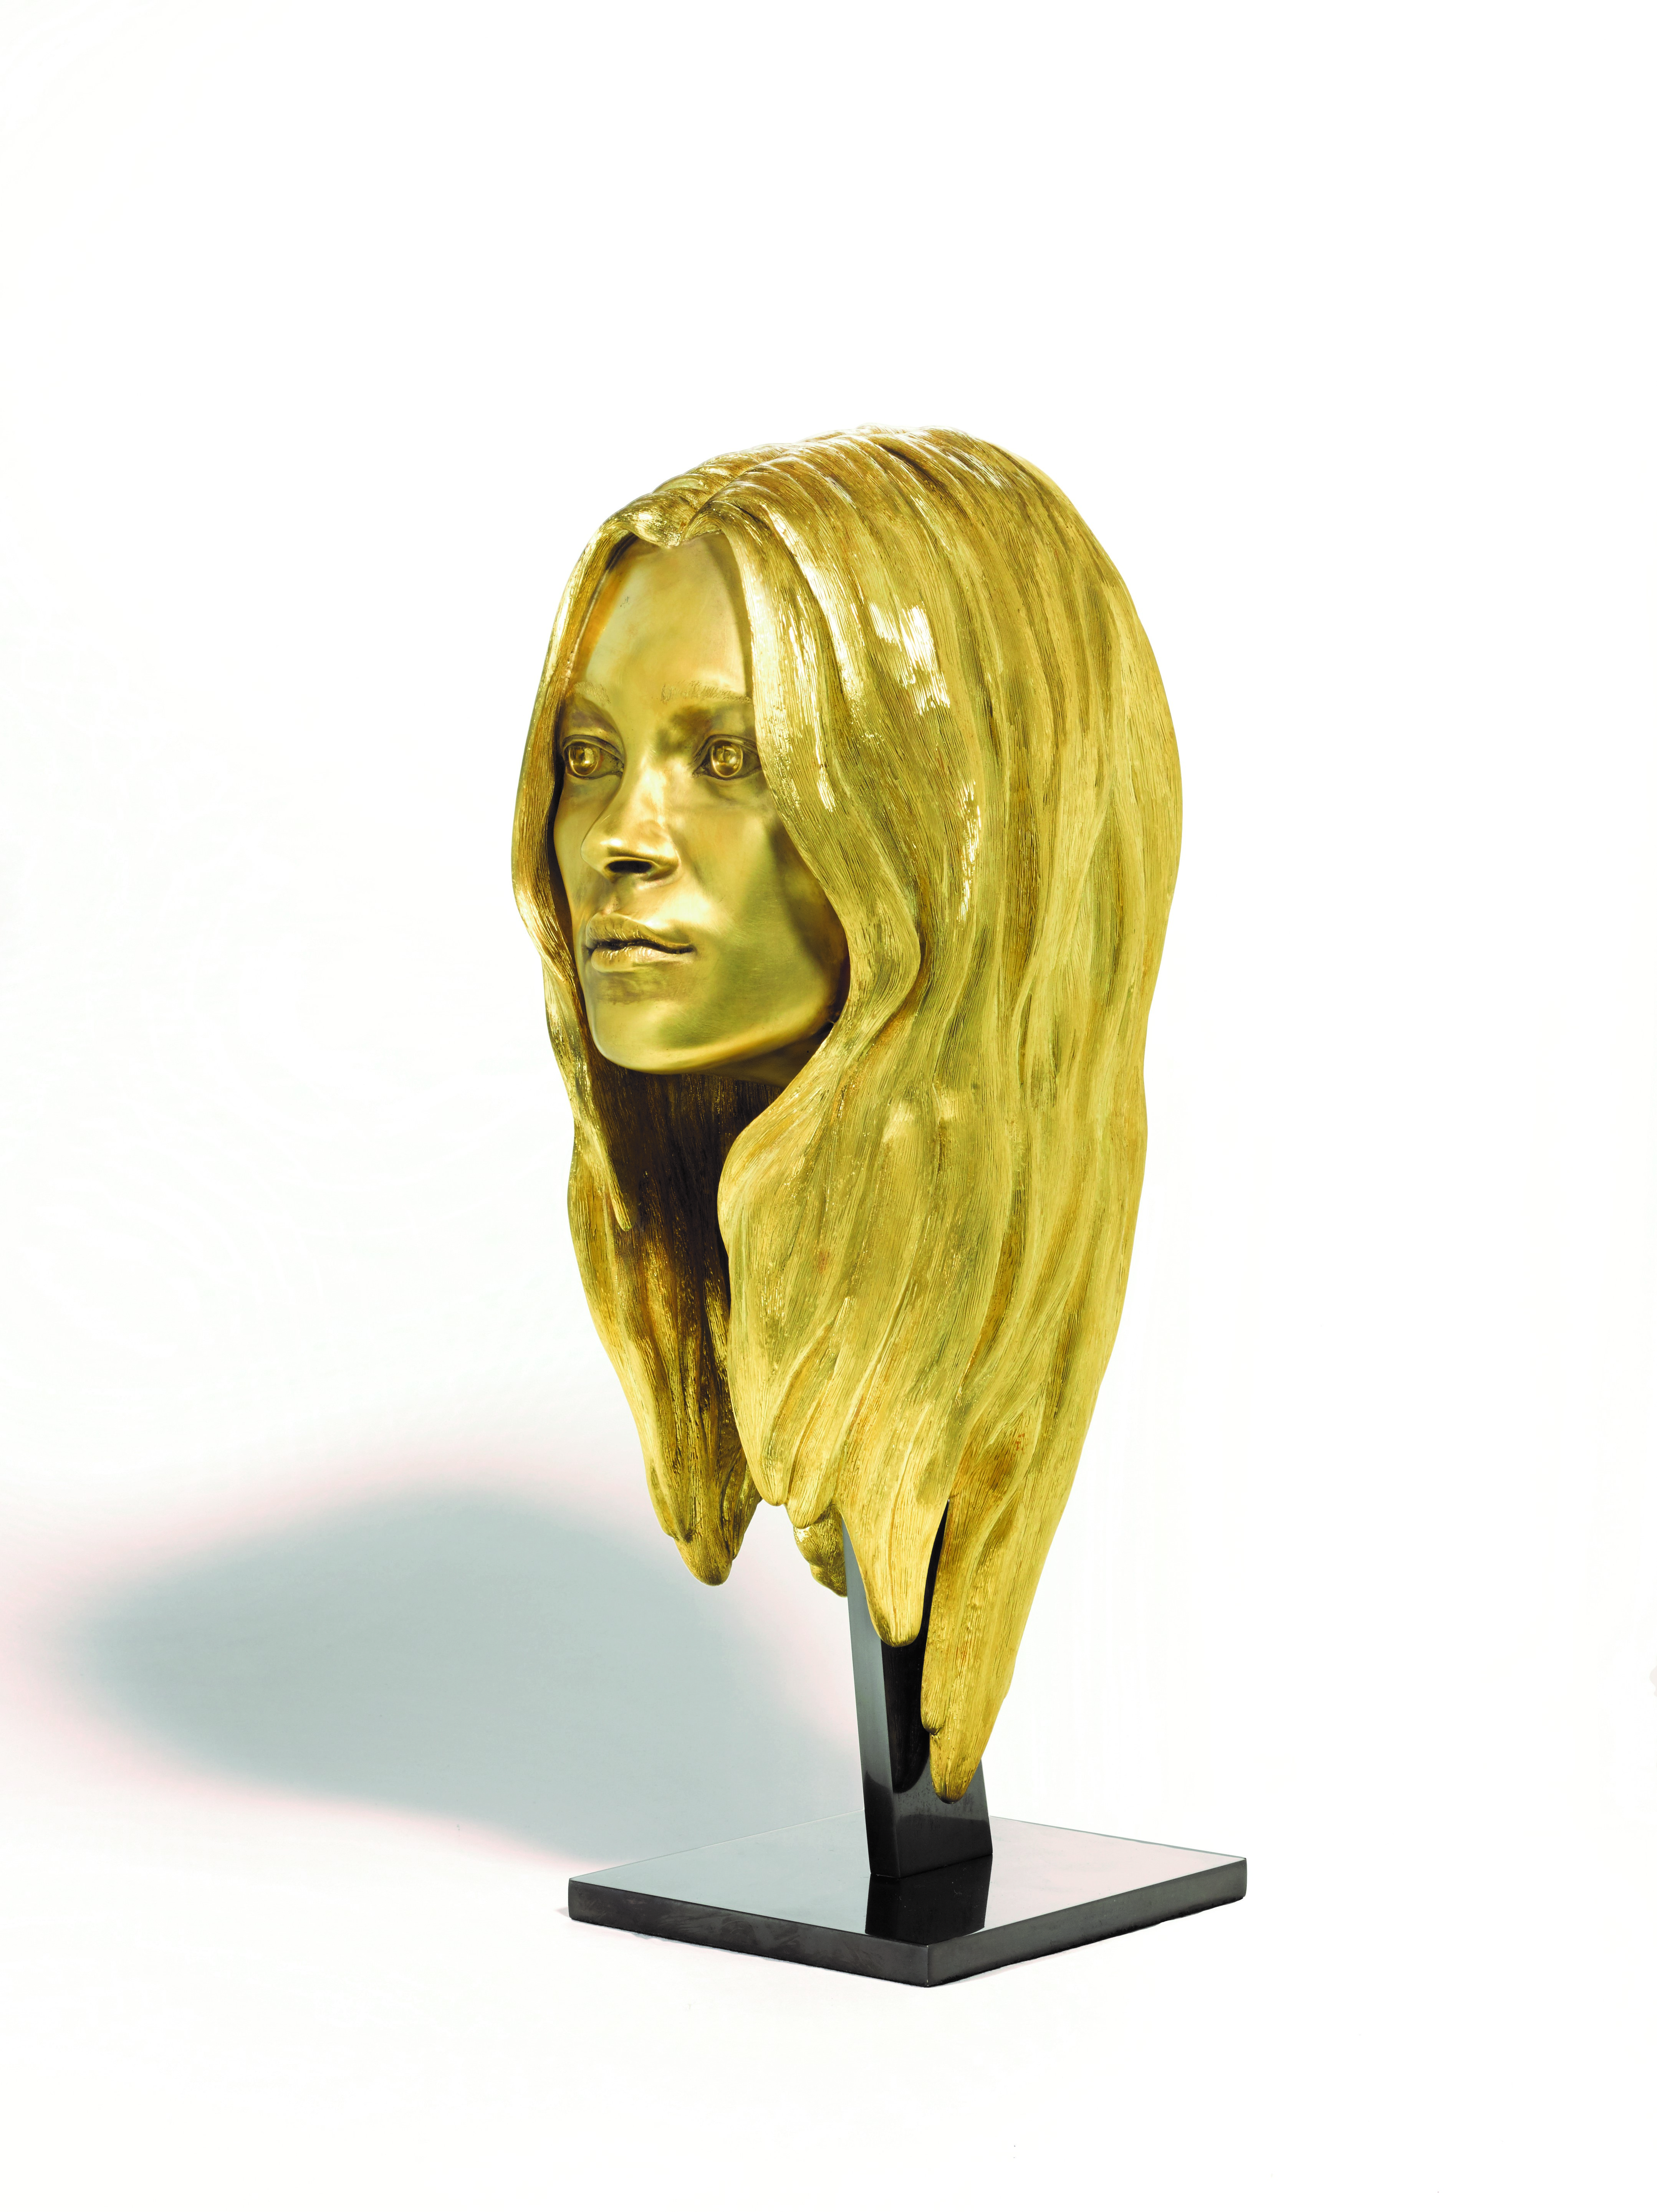 Marc Quinn's bust of Kate Moss is also up for auction